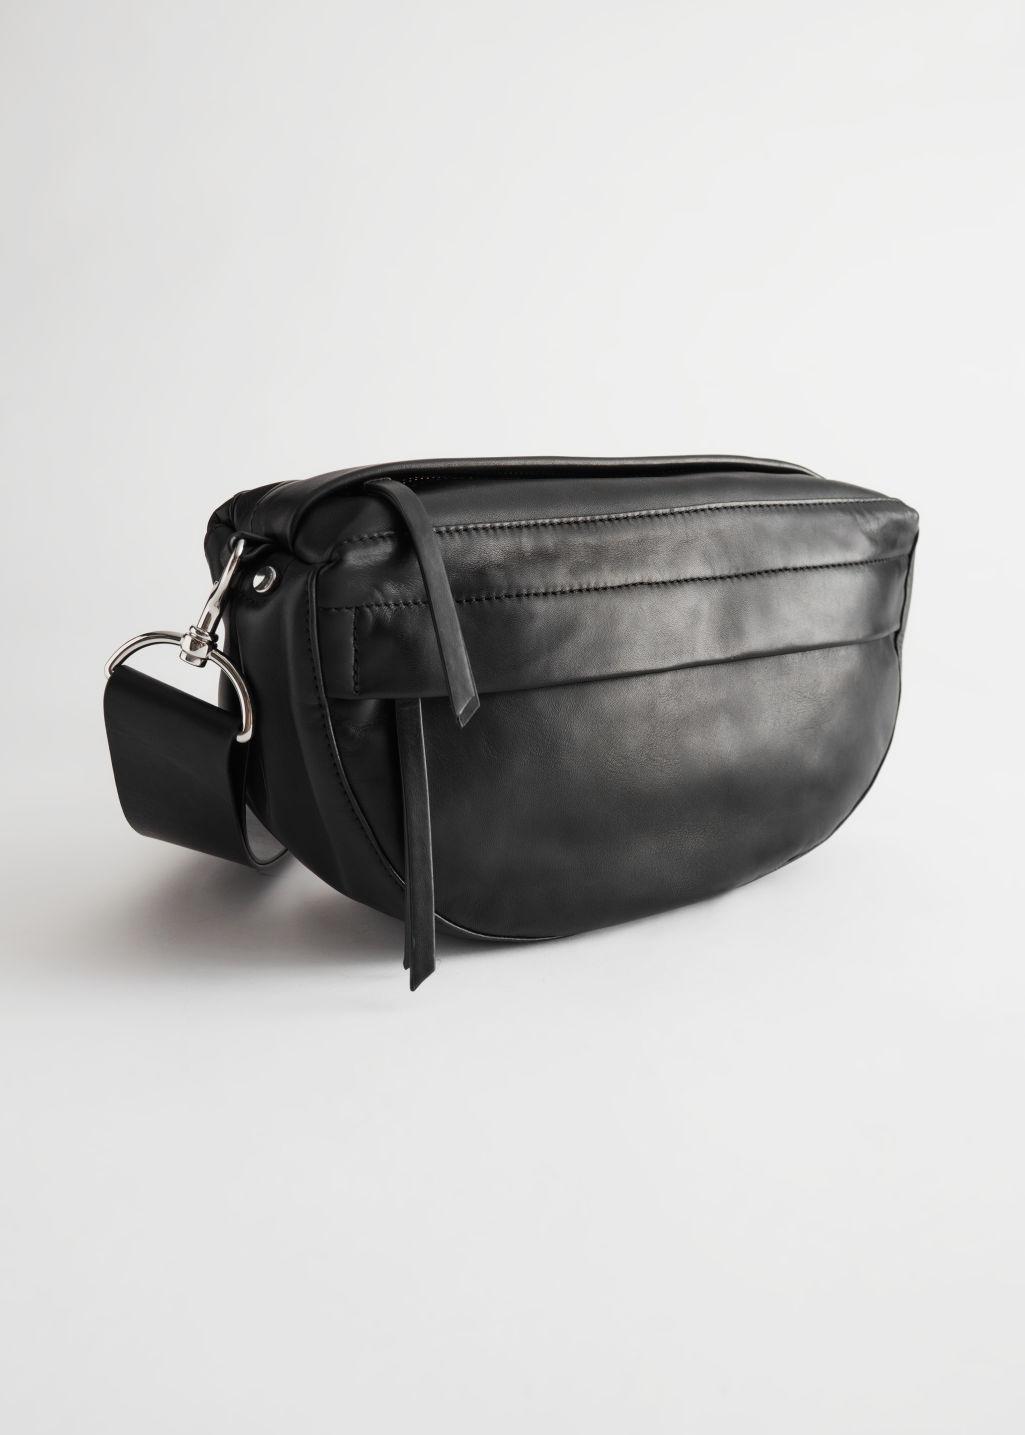 & Other Stories Leather Half Moon Crossbody Bag in Black | Lyst